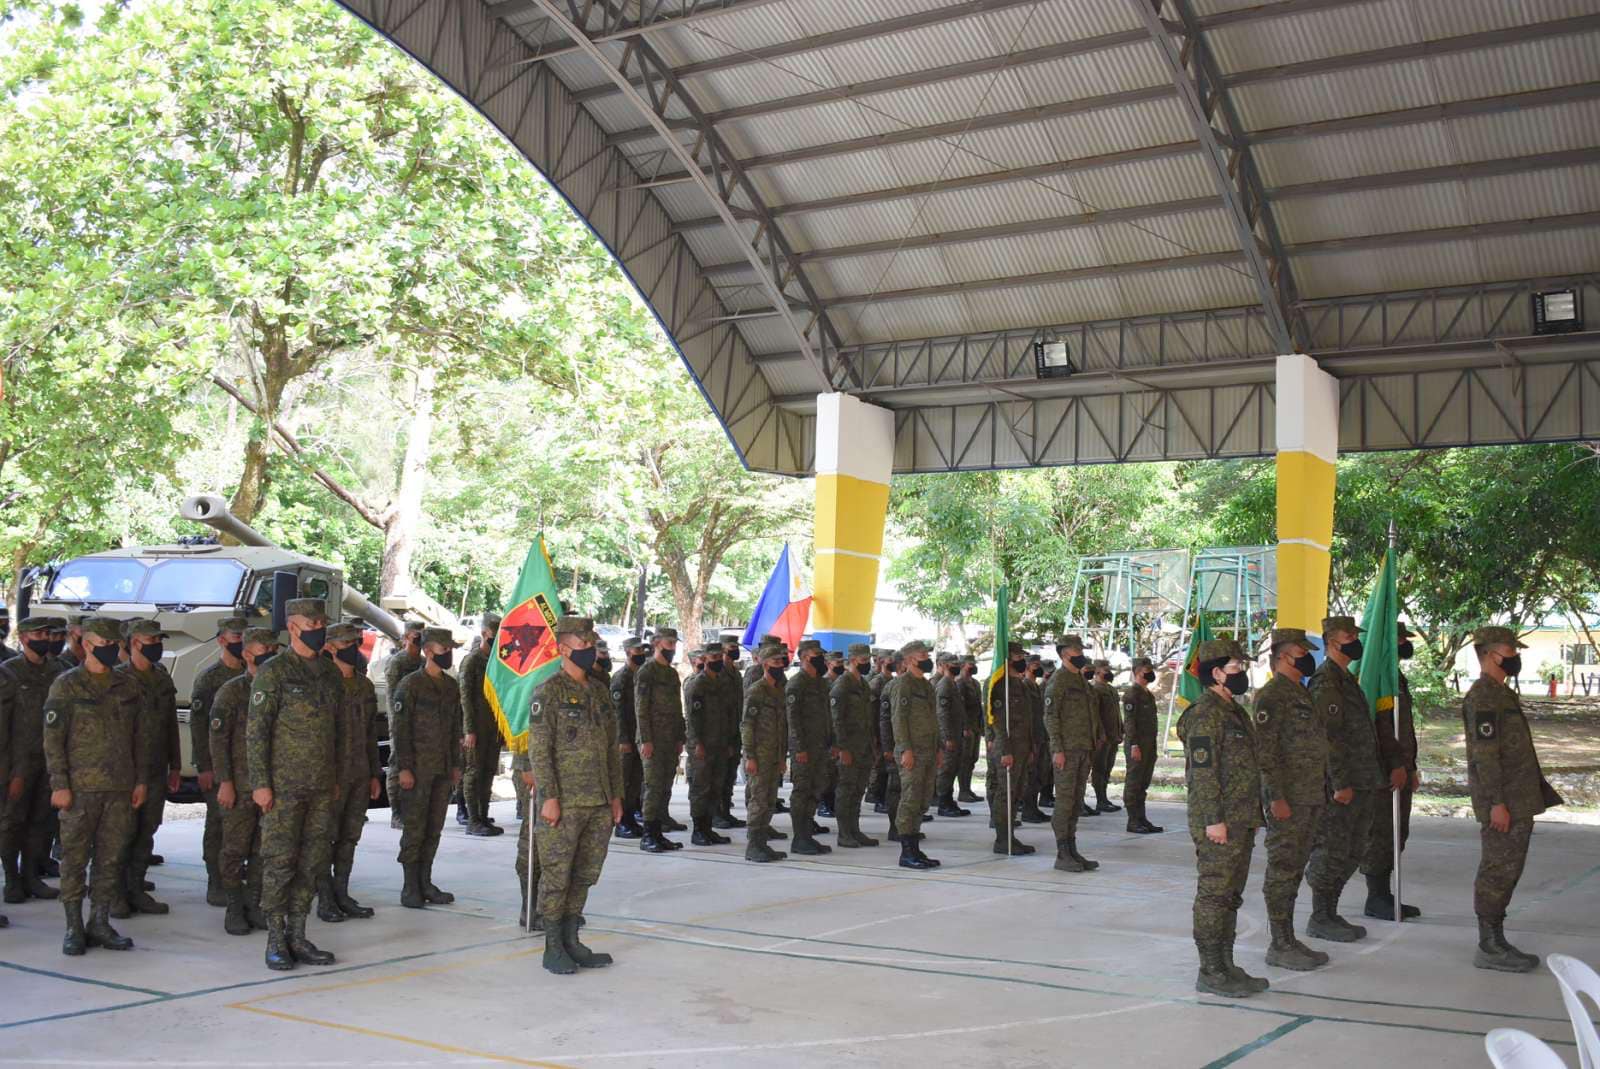 The Philippines Army standing in parade